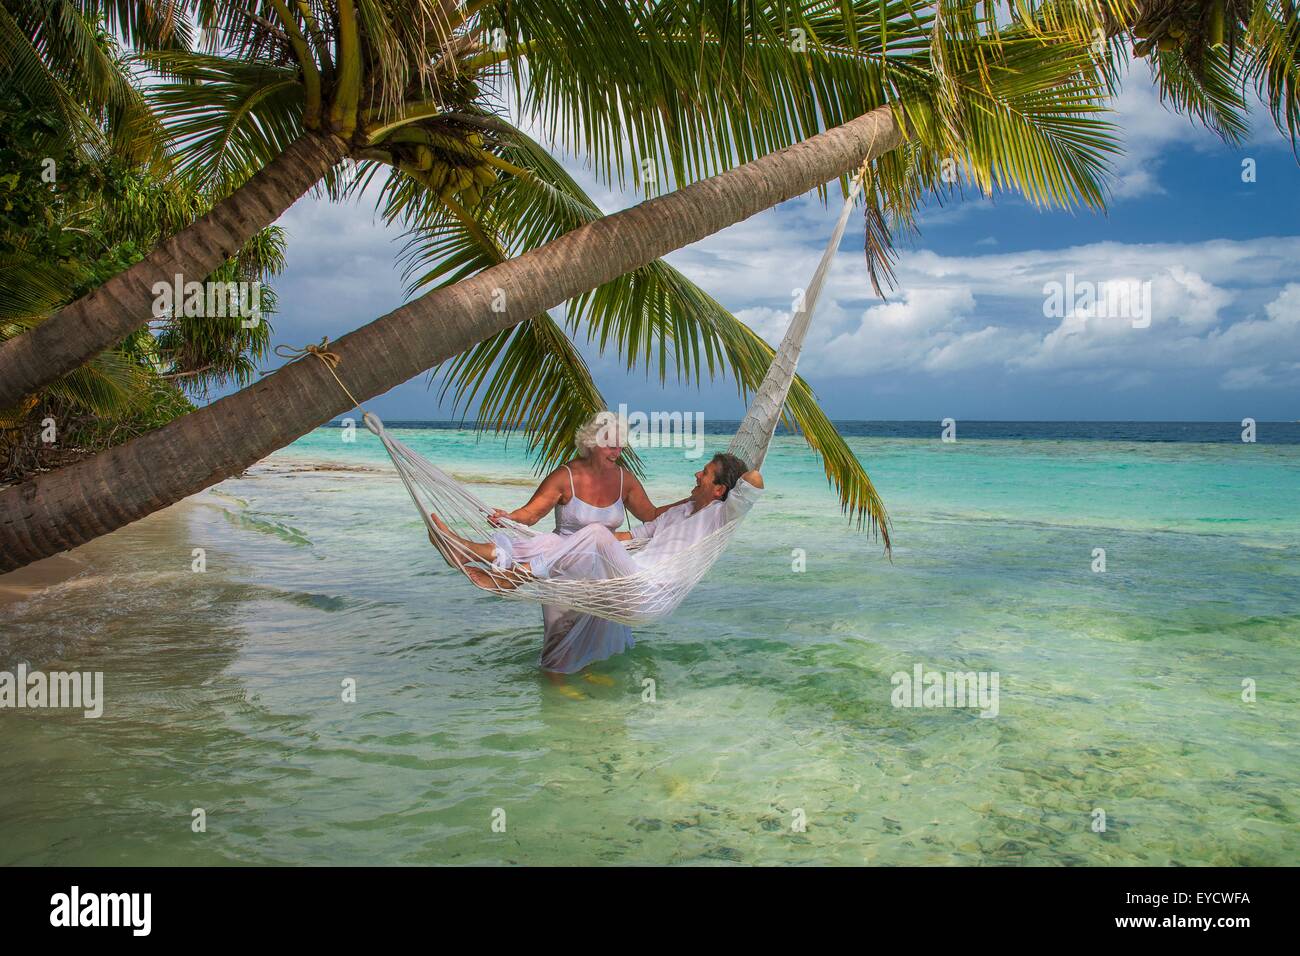 Senior man relaxing in hammock with woman, Maldives Stock Photo